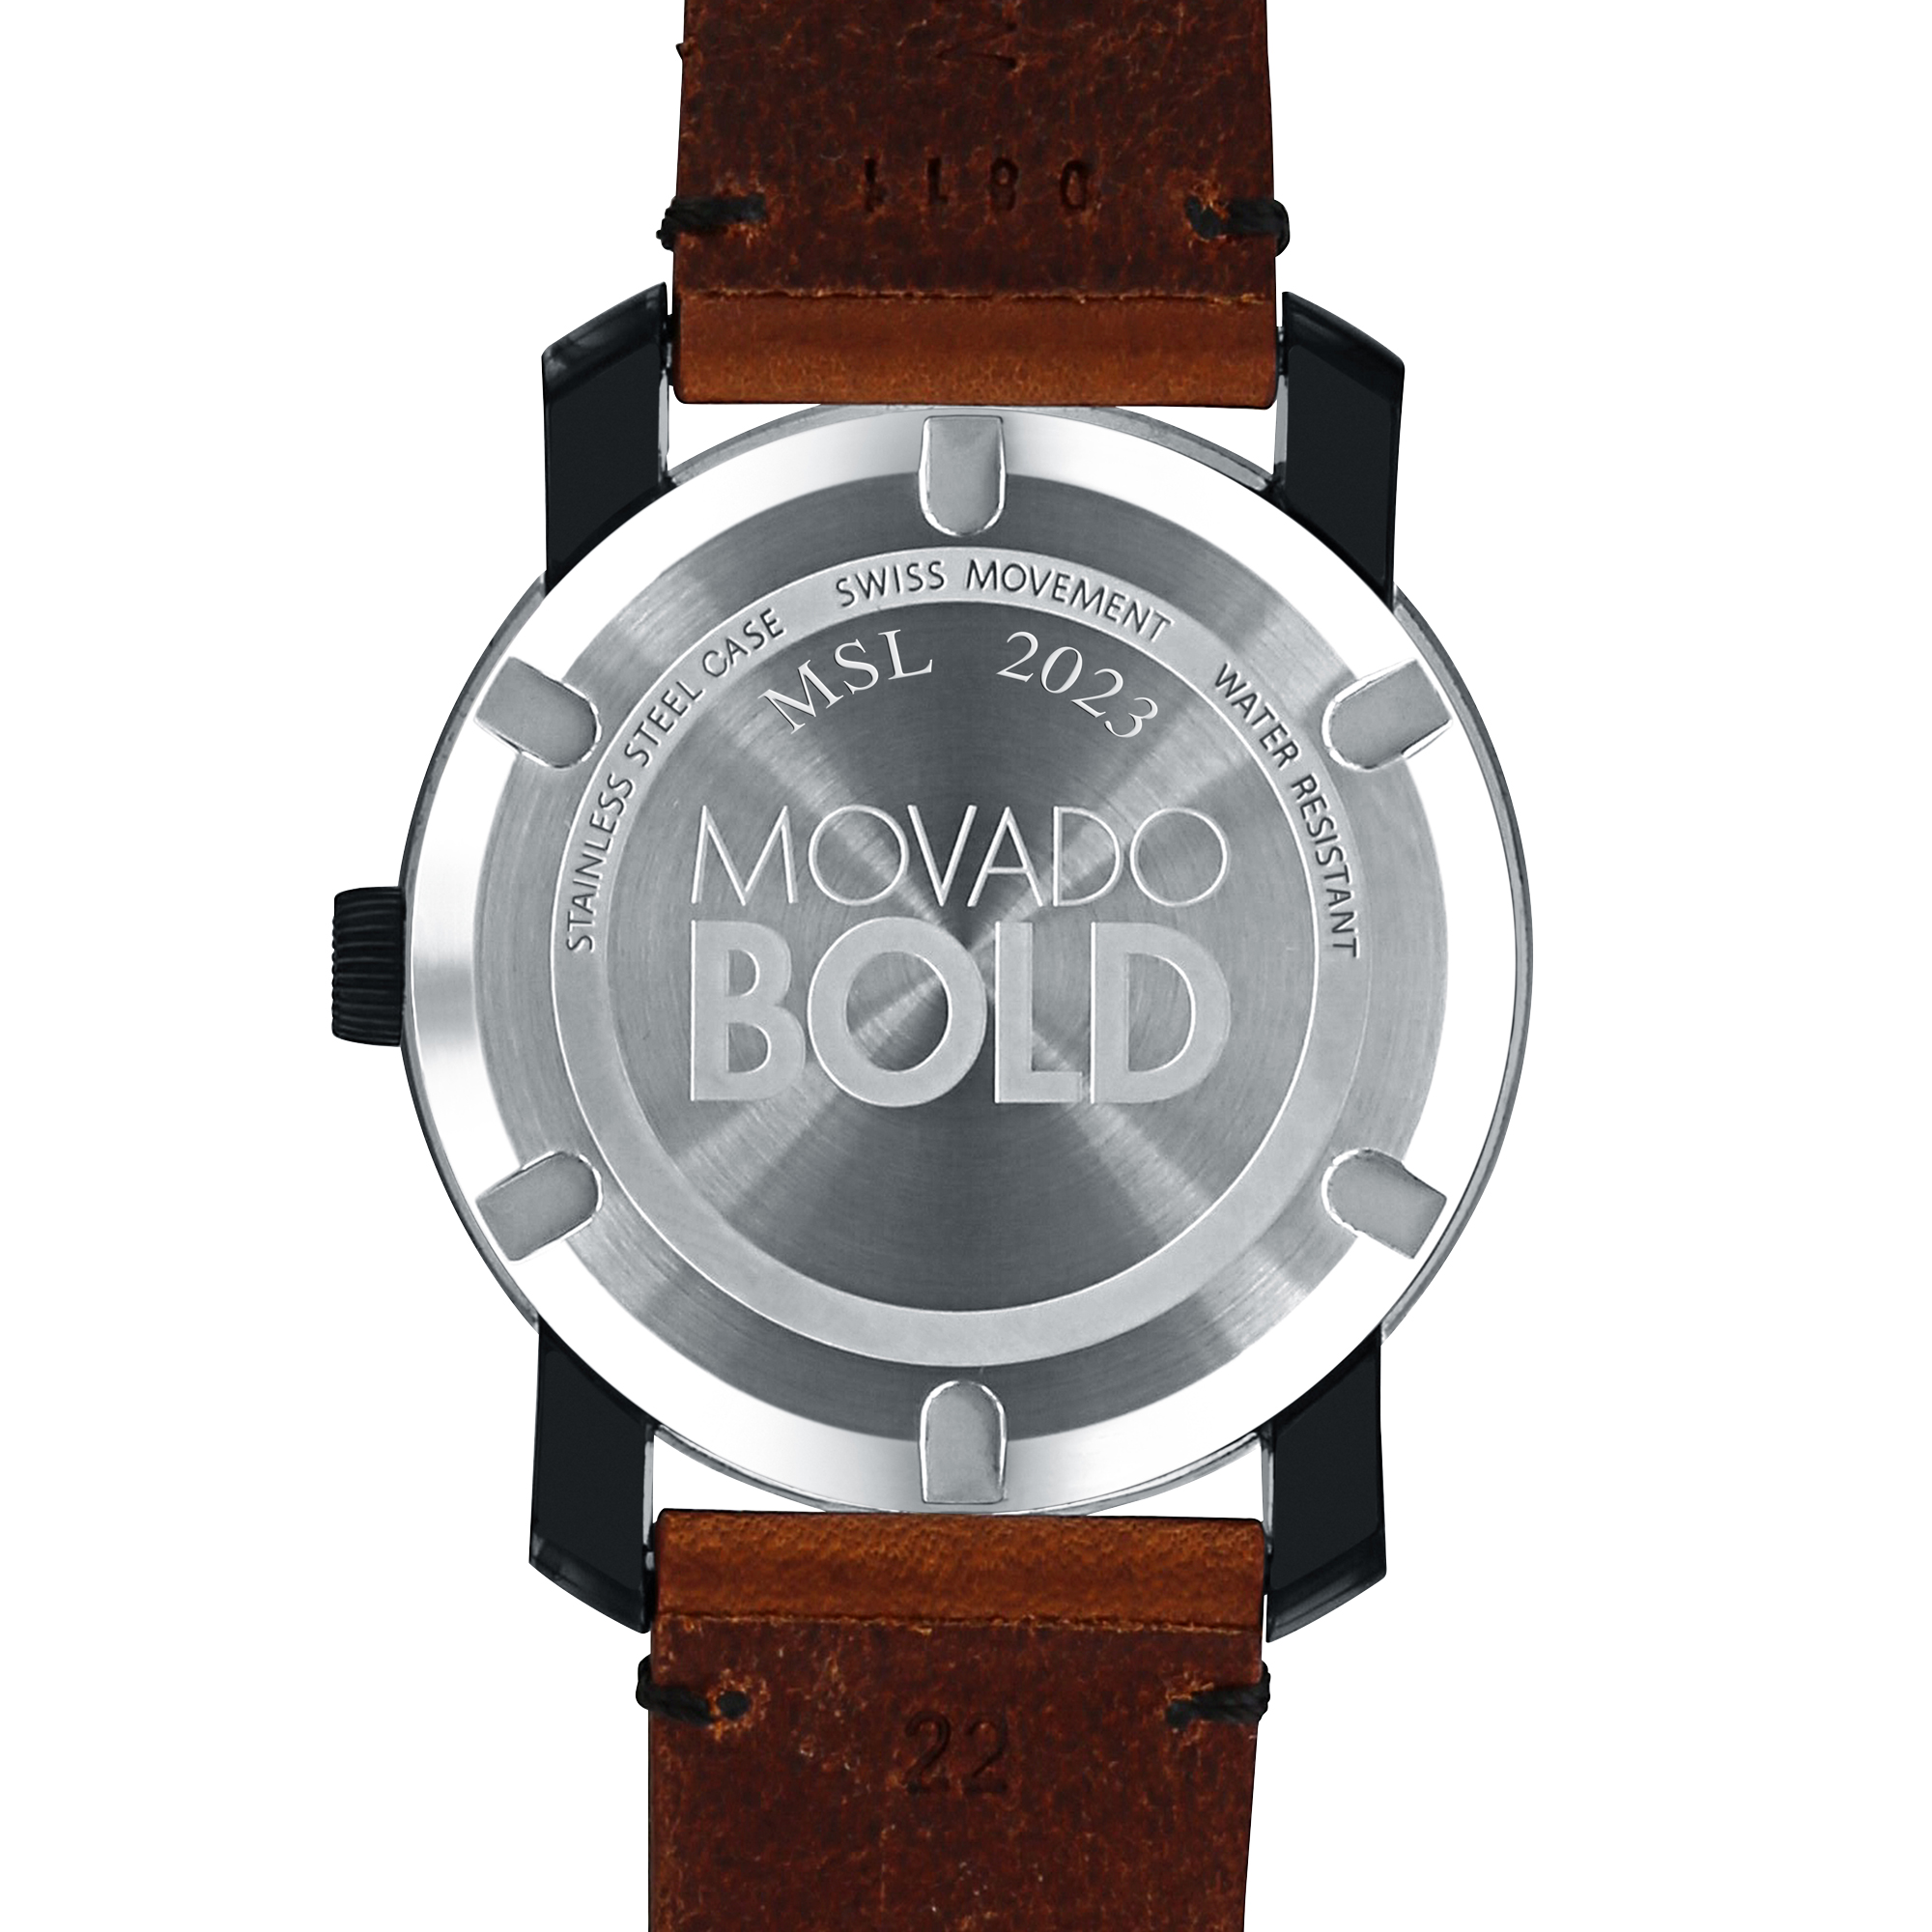 Siena College Men's Movado BOLD with Brown Leather Strap - Image 3